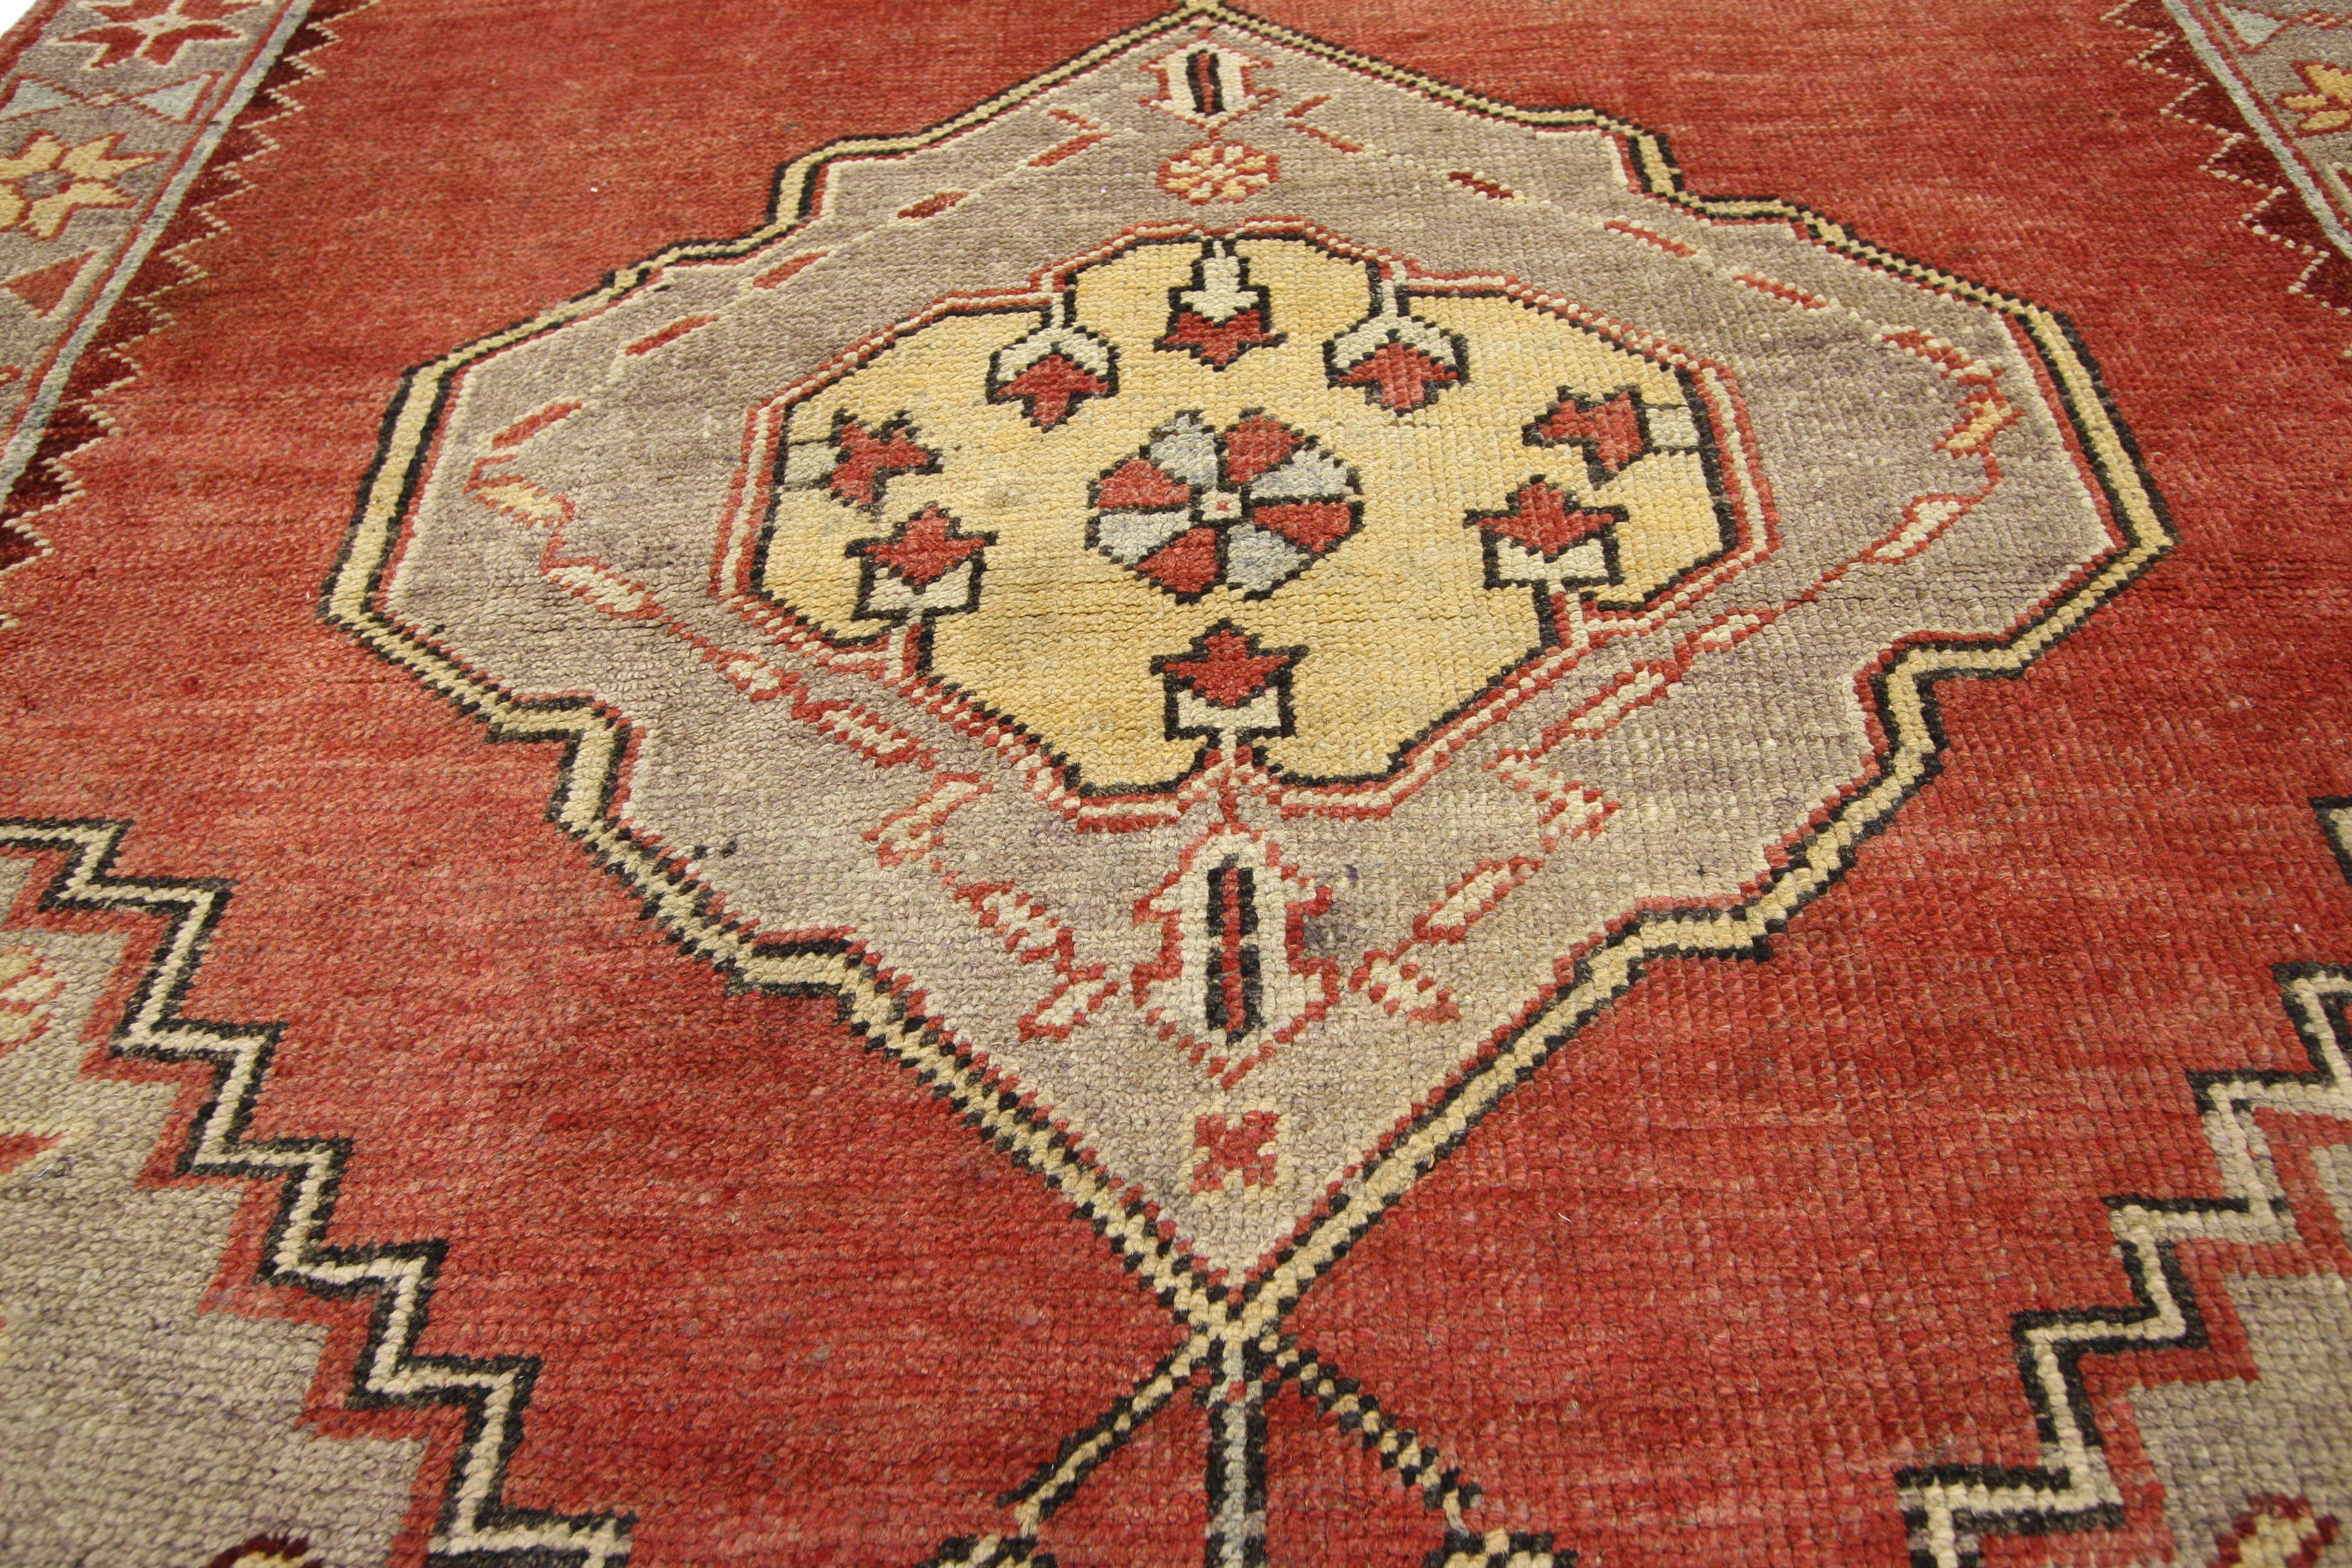 73891, vintage Turkish Oushak runner with French Provincial style, wide hallway runner. This hand knotted wool vintage Turkish Oushak runner features three connected scalloped hexagonal medallions with floral pendants spread across an abrashed brick